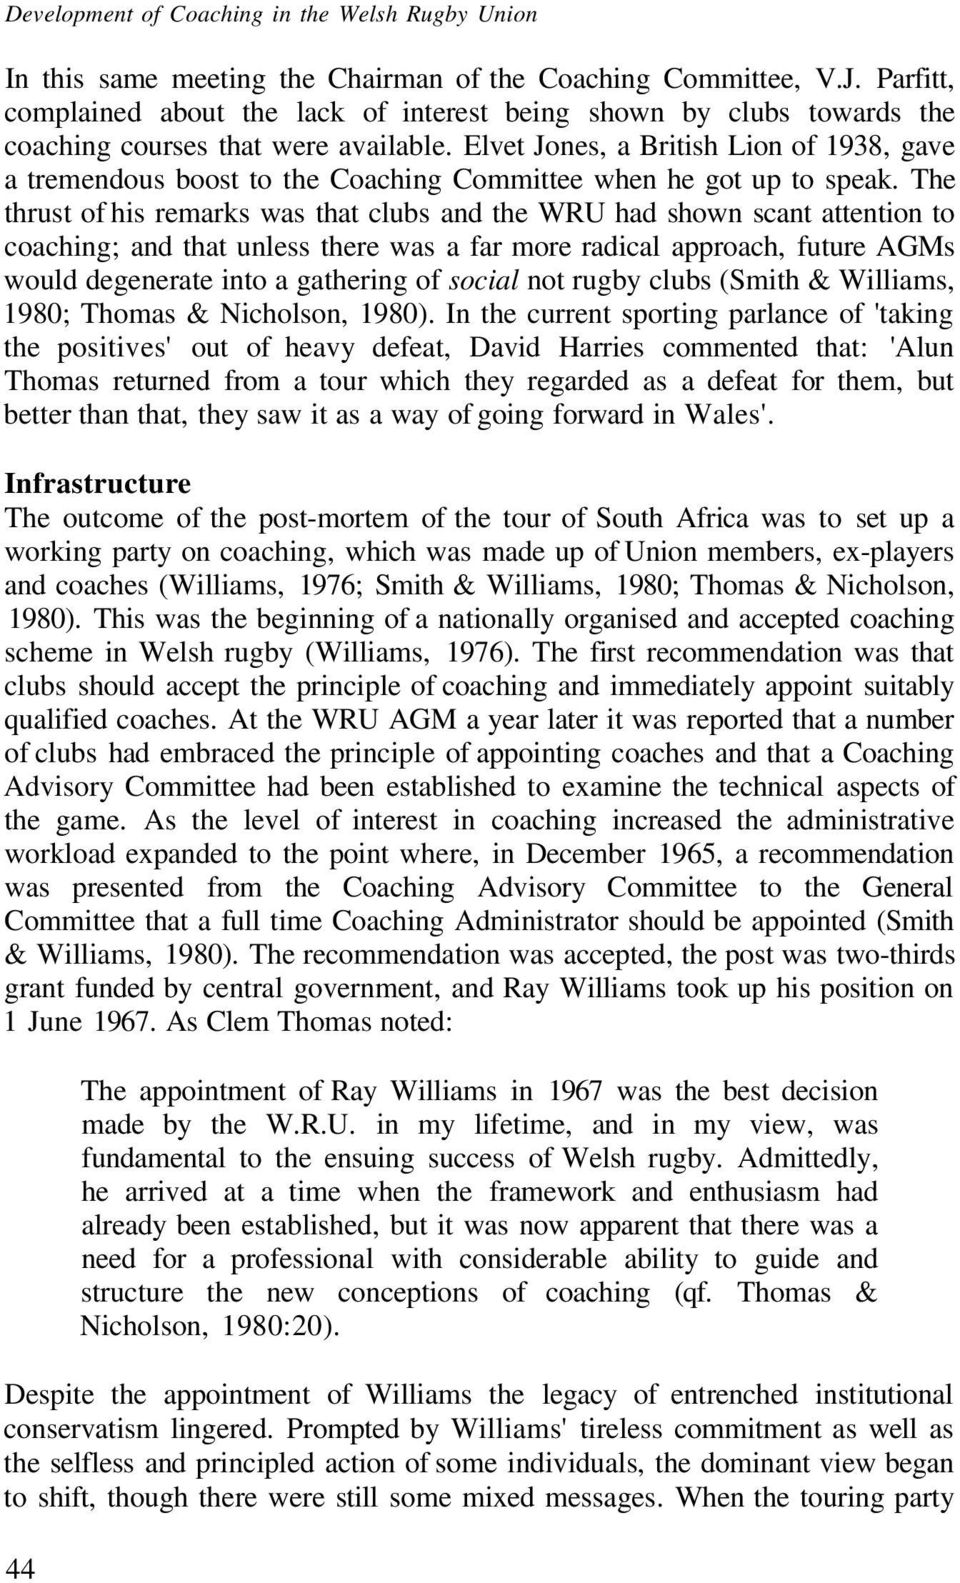 Elvet Jones, a British Lion of 1938, gave a tremendous boost to the Coaching Committee when he got up to speak.